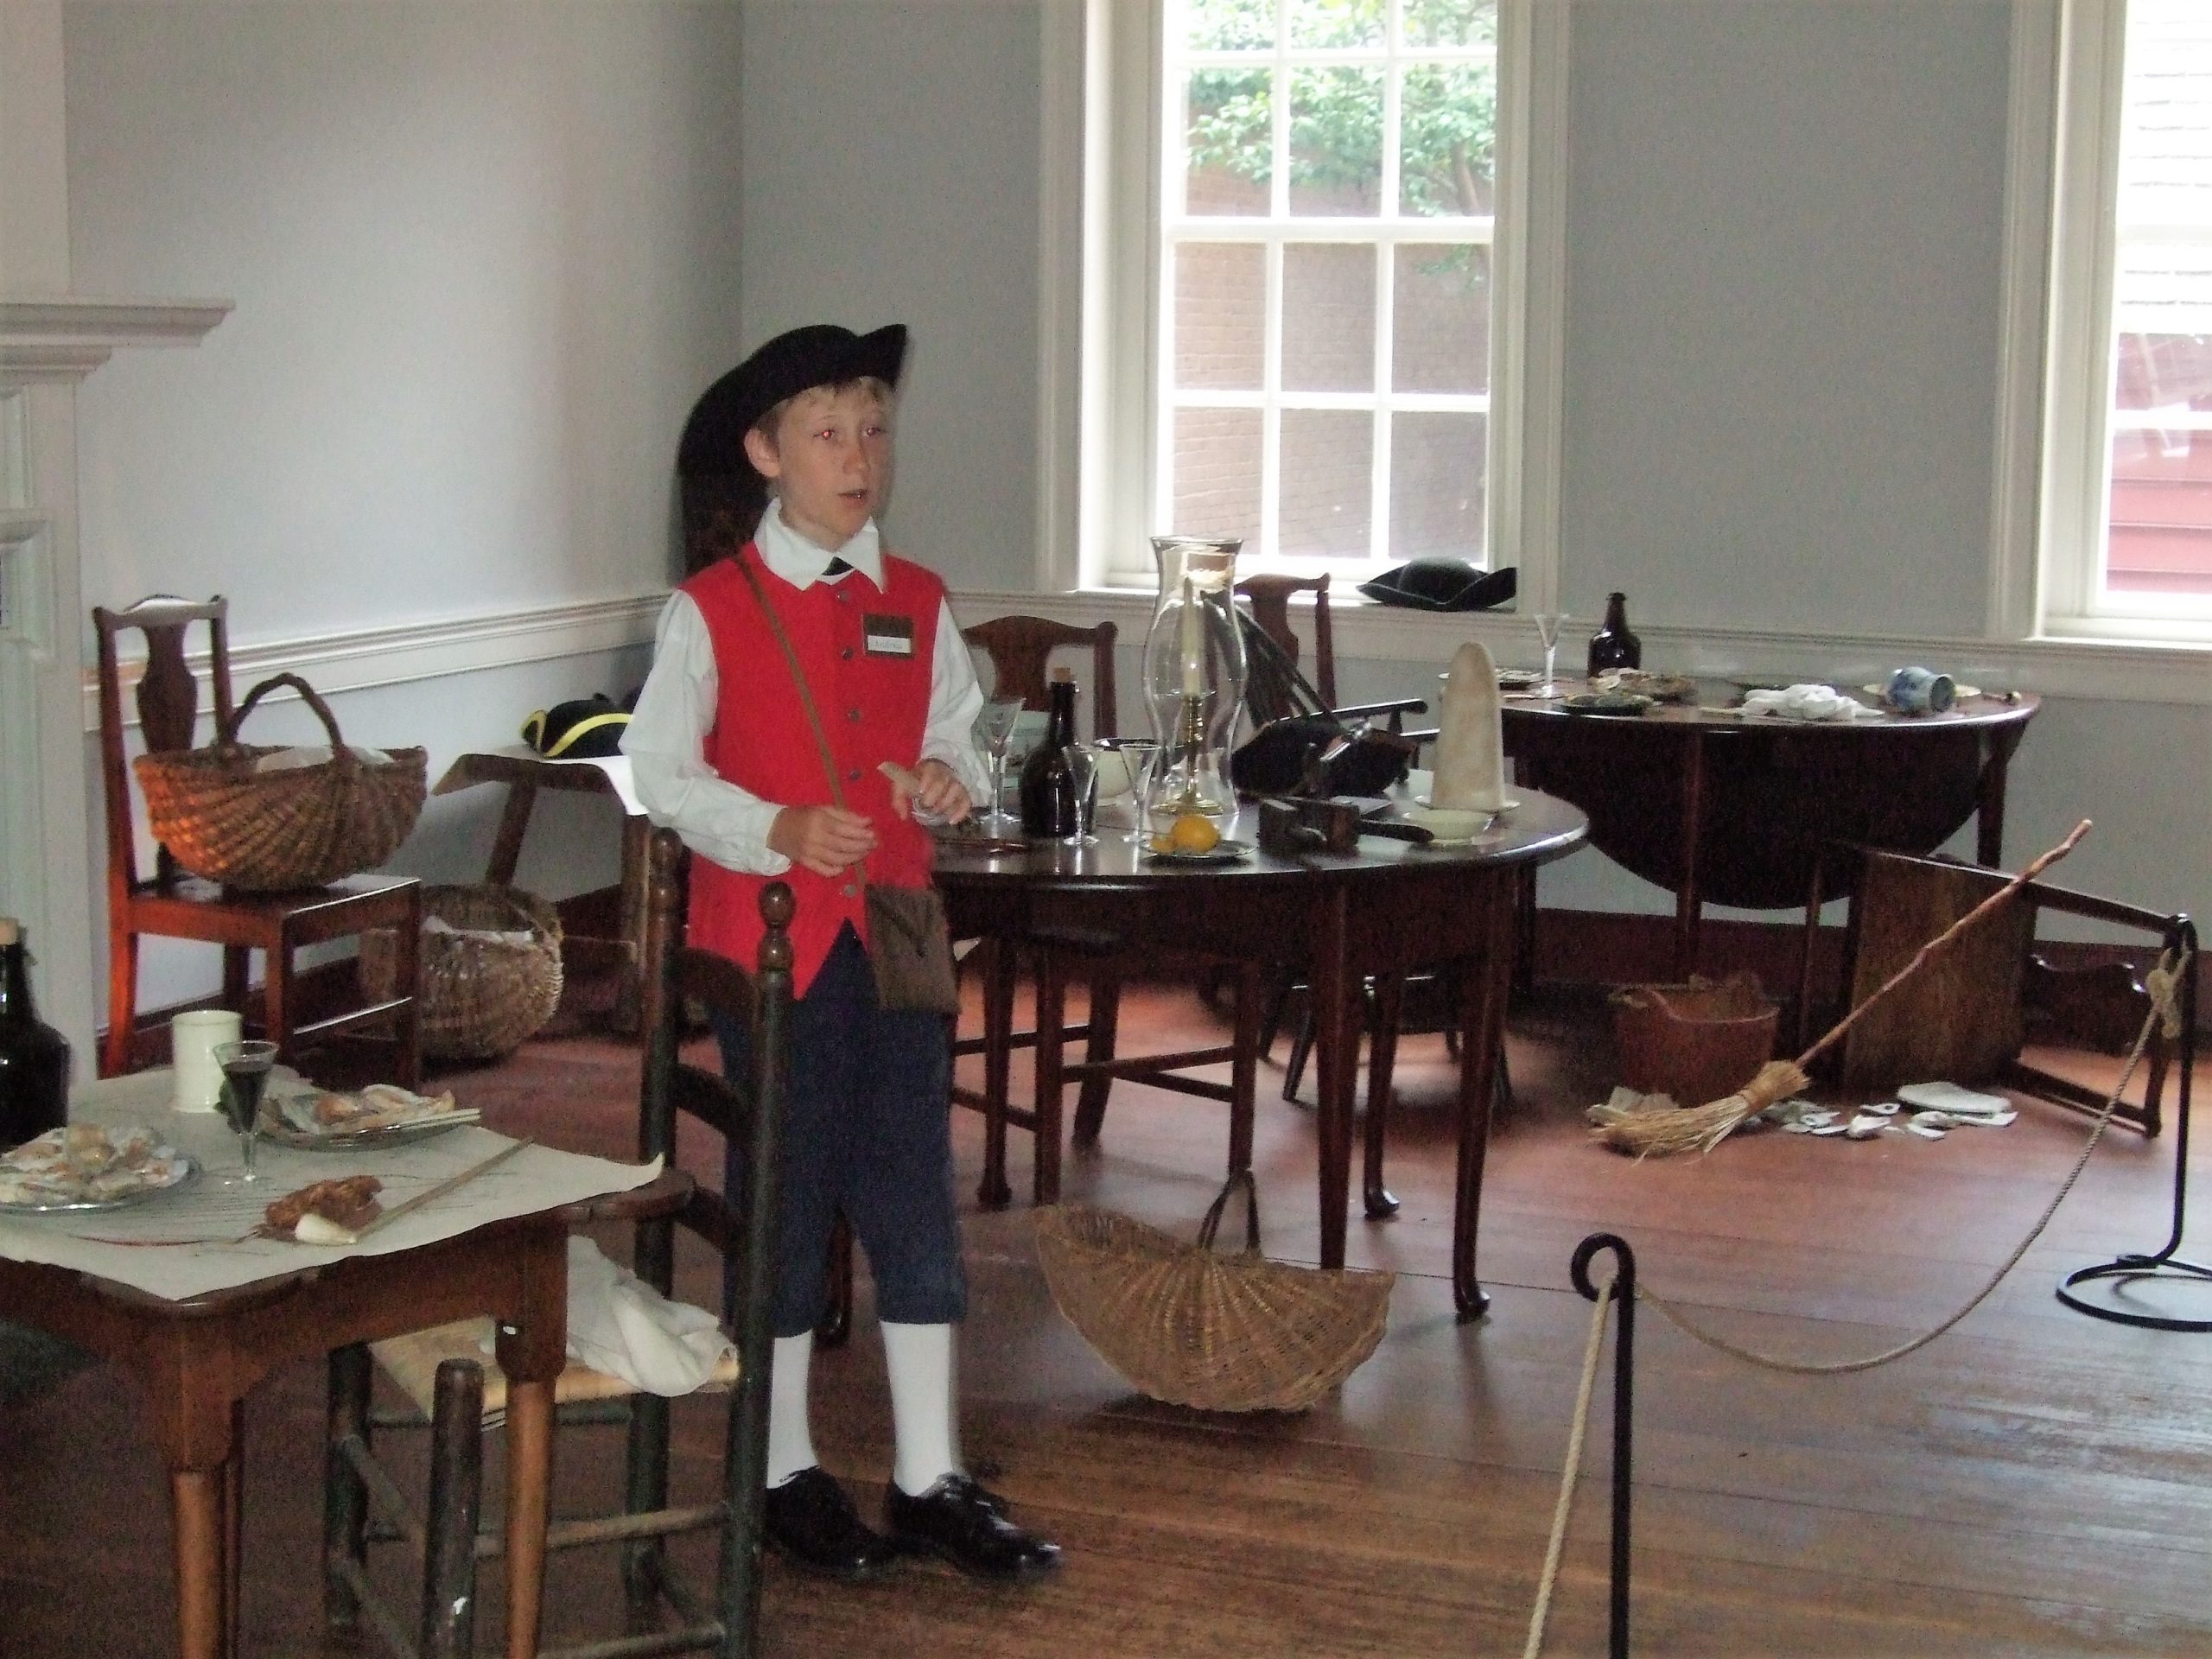 Students in fourth through eighth grade learn to conduct tours about Gadsby’s history.